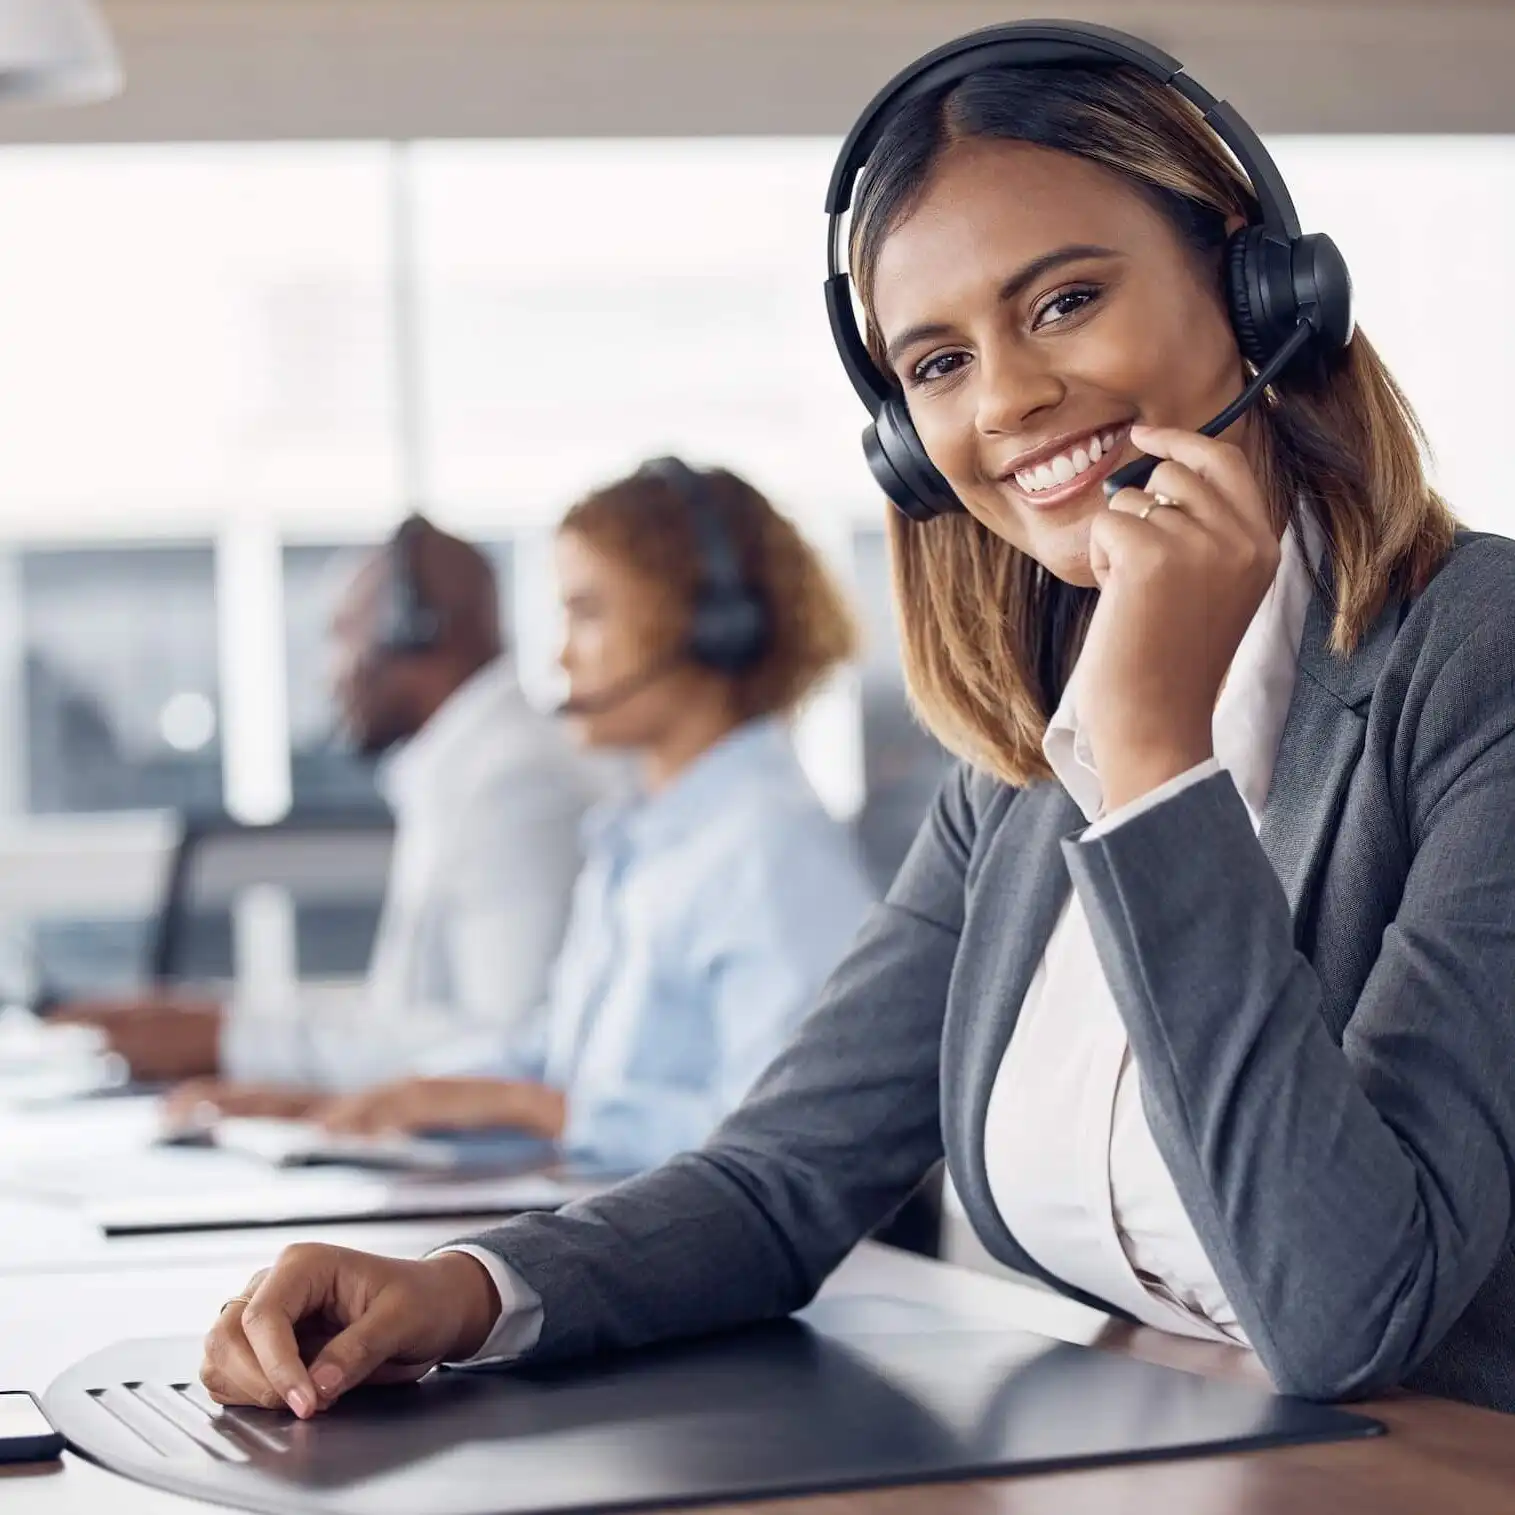 call-center-woman-portrait-and-smile-in-office-for-customer-support-job-happiness-or-microphone-i-uai-1515x1515